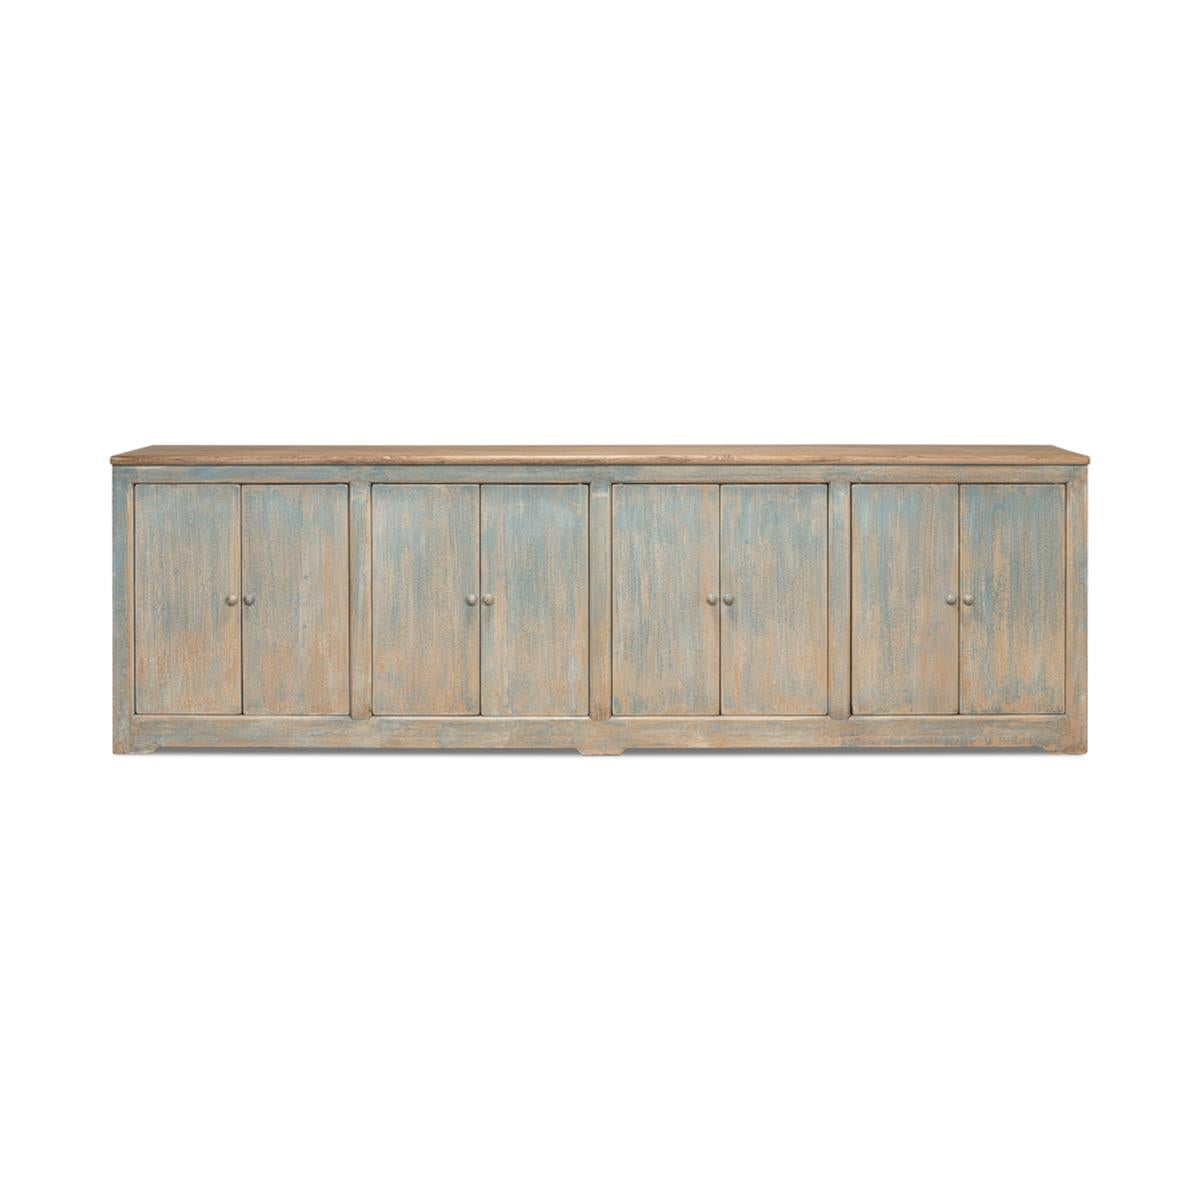 An eight door pine sideboard cabinet with a soft painted rub through antiqued bluewash finish with a natural finish top. Doors open to reveal a painted interior with removable shelves.

Dimensions: 122